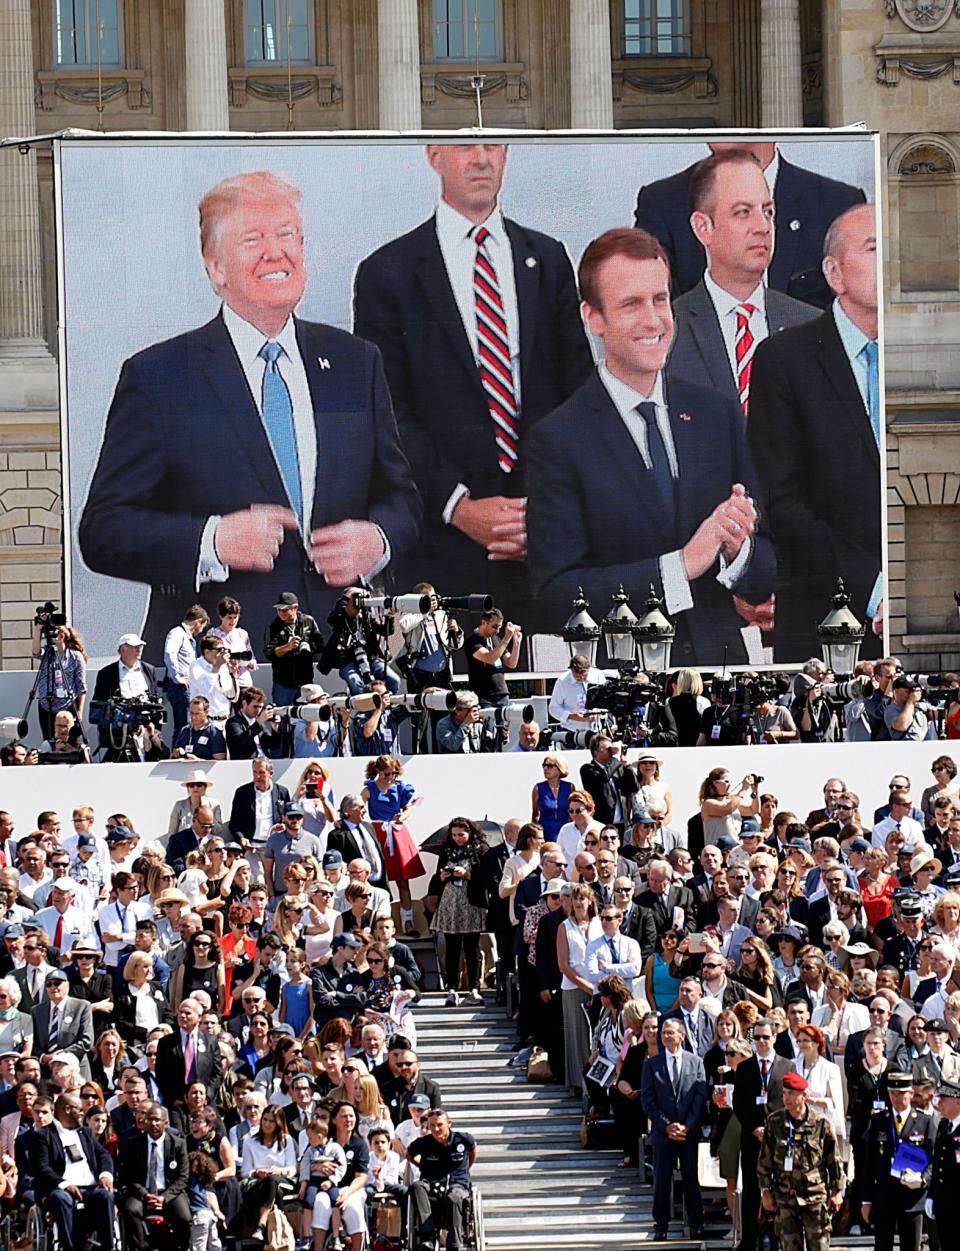 <p>President Donald Trump and French President Emmanuel Macron are seen on a giant screen on the Place de la Concorde as they attend the traditional Bastille Day military parade on the Champs-Elysees in Paris, France, July 14, 2017. (Photo: Kevin Lamarque/Reuters) </p>